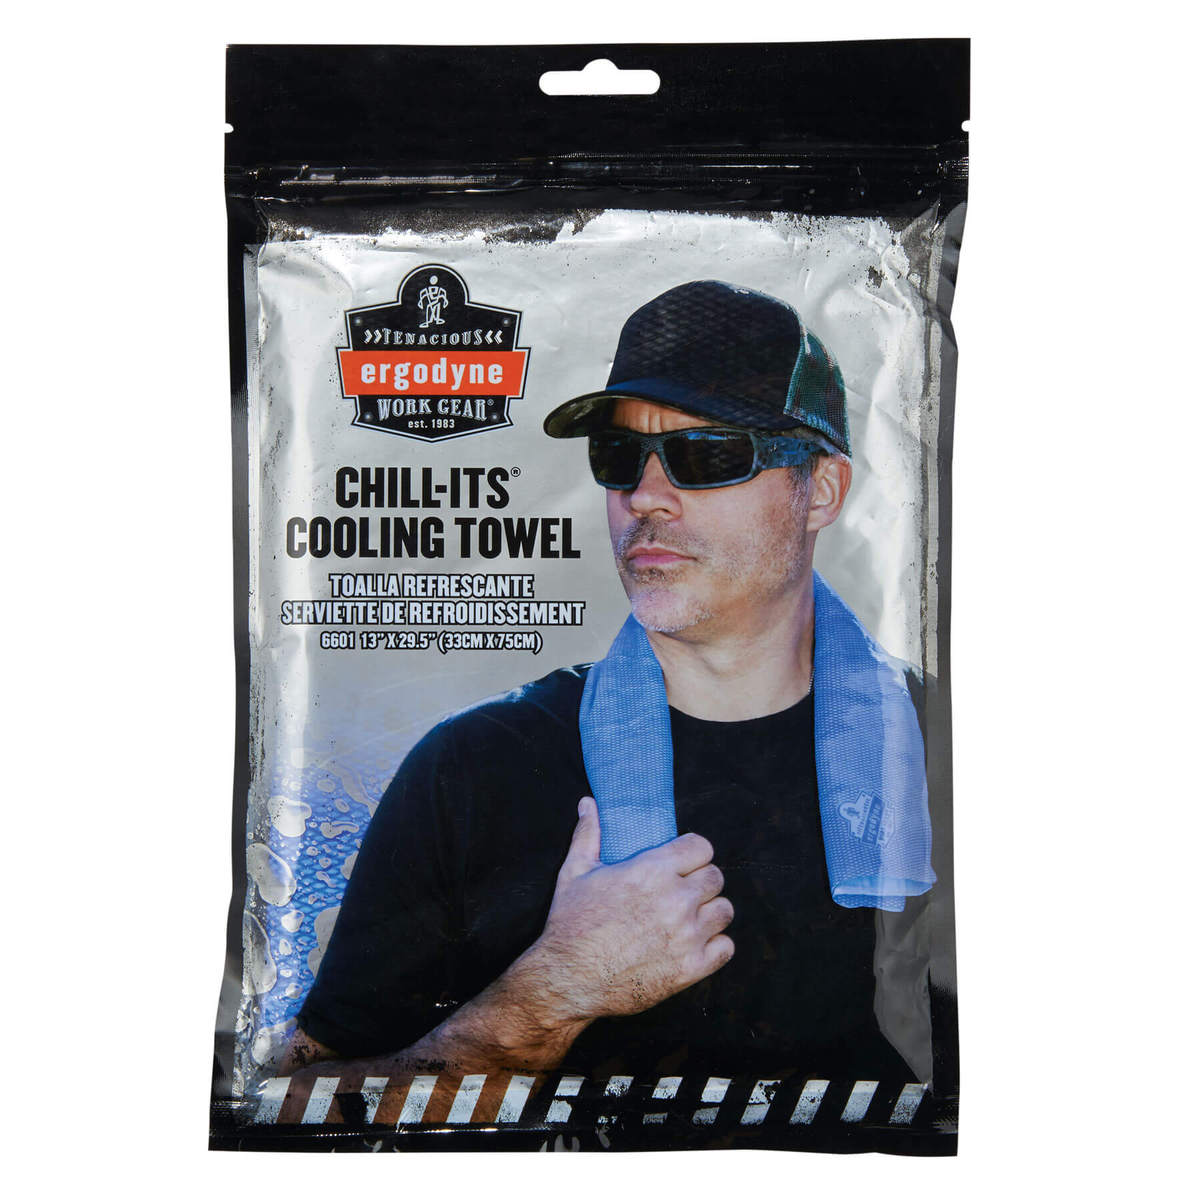 Ergodyne Chill-its 6602 Cooling Towel Blue 13 X 29 for sale online 